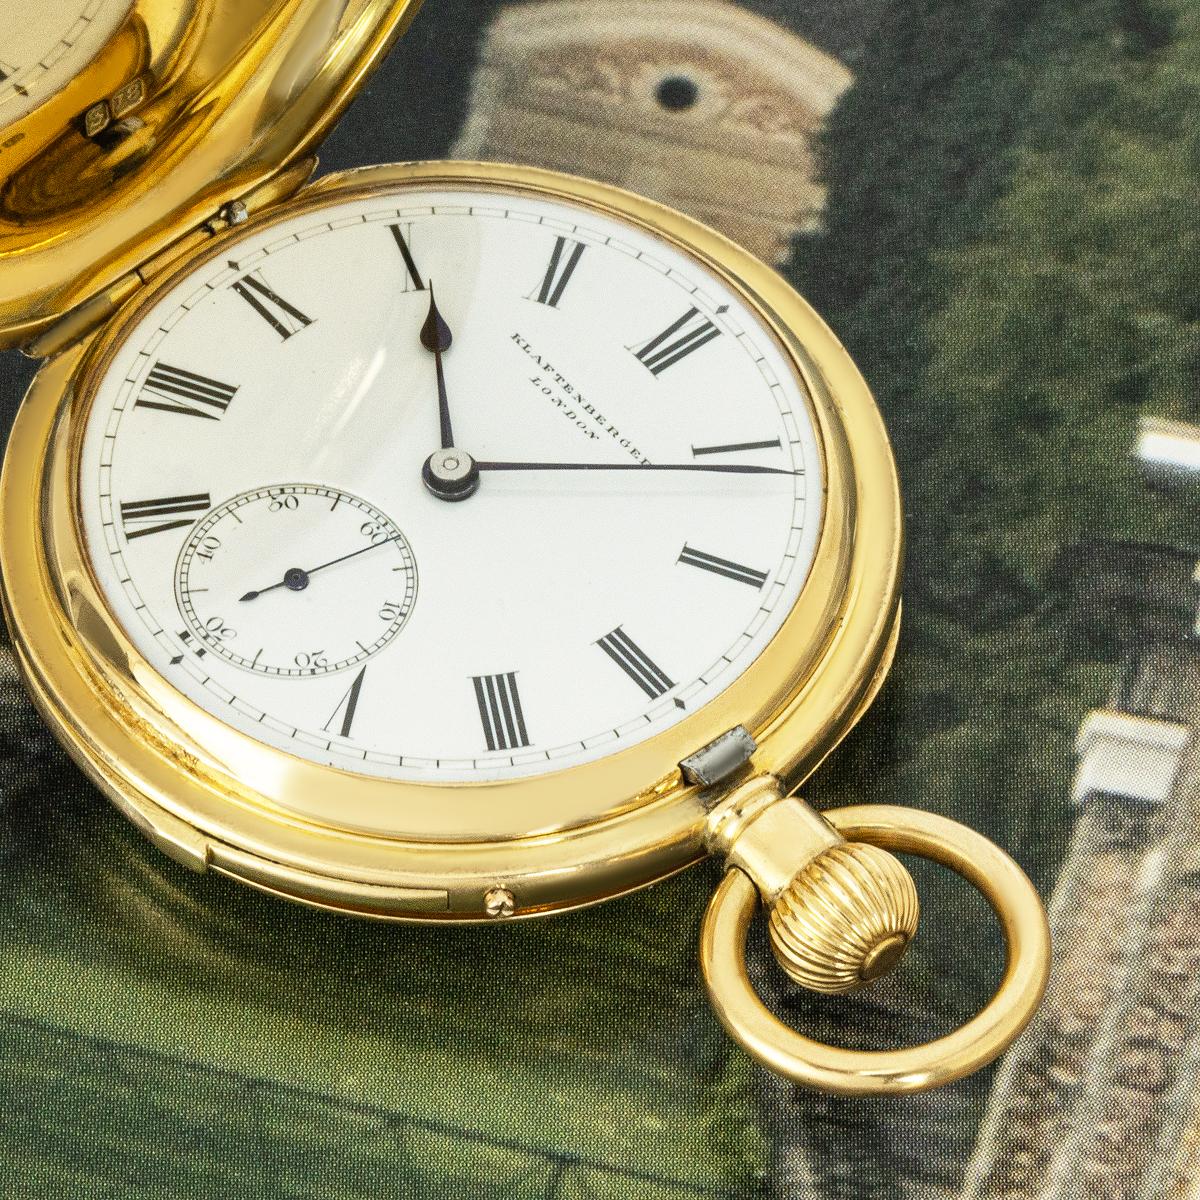 Klaftenberger. A Rare Miniature 18ct Gold Hunter Quarter Repeater Antique Pocket Watch C1871.

Dial: The perfect white enamel dial fully signed Klaftenberger London, with Roman numerals outer minute track and subsidiary seconds dial at six o'clock.